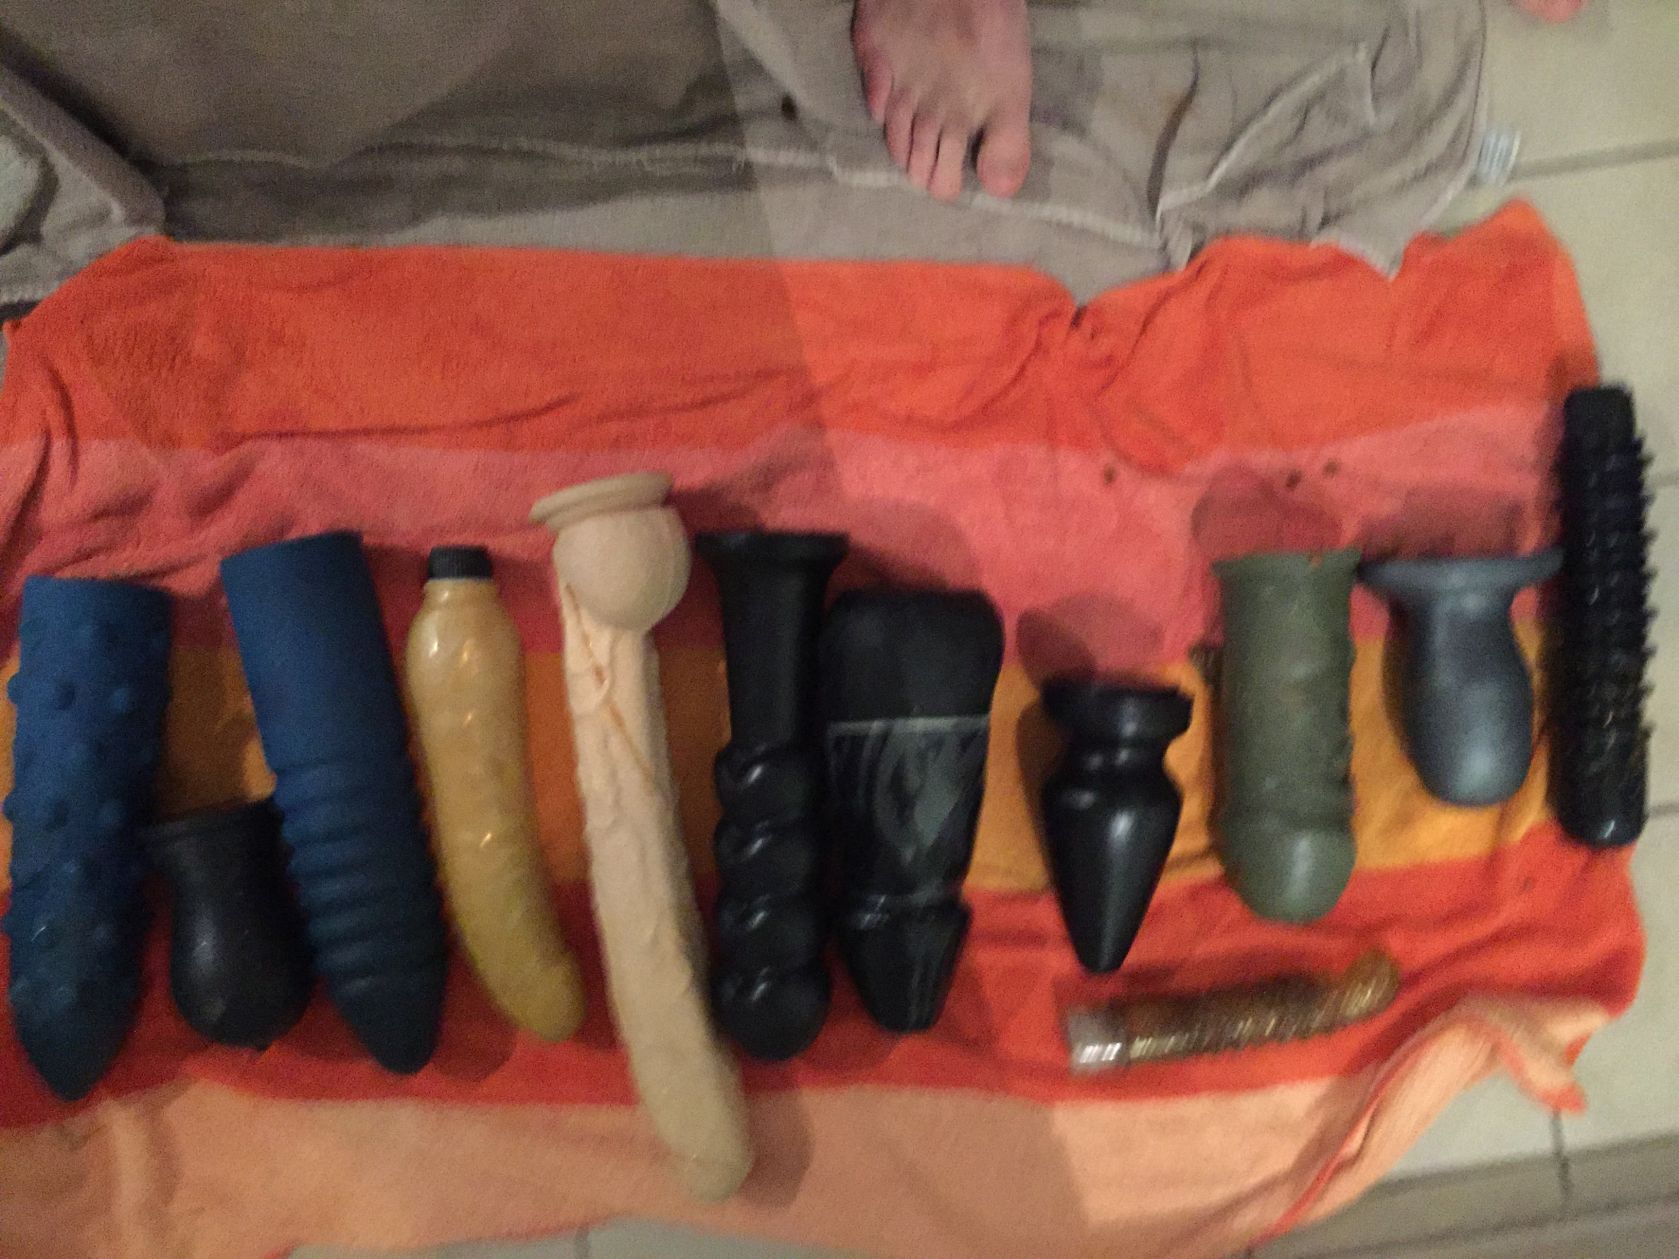 Toys for my ass tonight